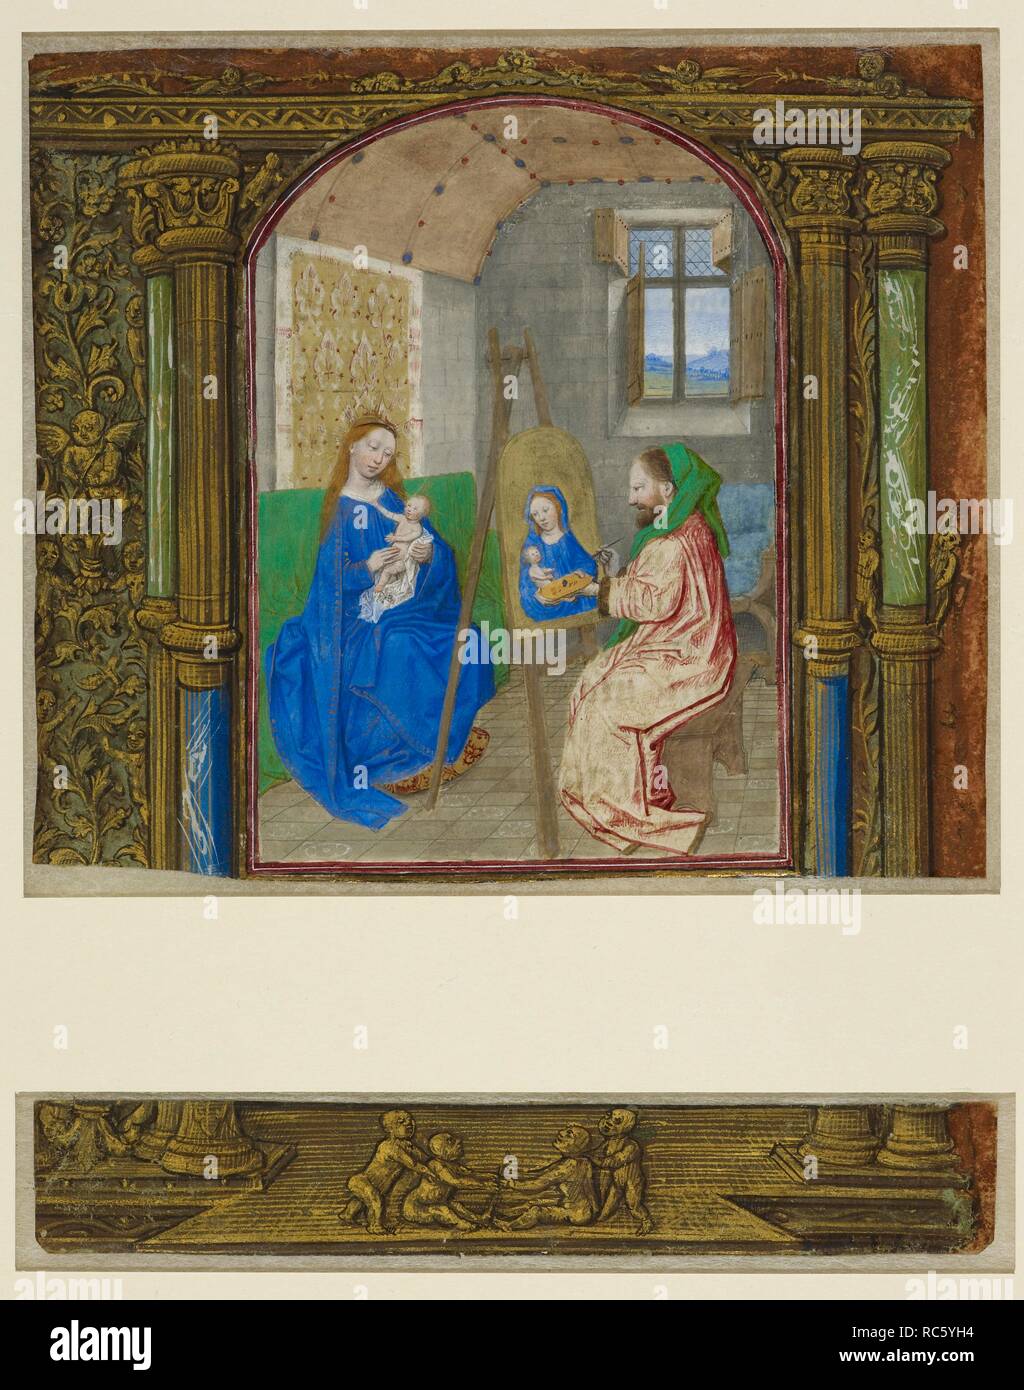 St. Luke painting the Virgin and Child. Cuttings from a Book of Hours. Flanders or north-east France; last quarter of 15th century. Source: Add. 71117 B. Language: Latin and French. Stock Photo